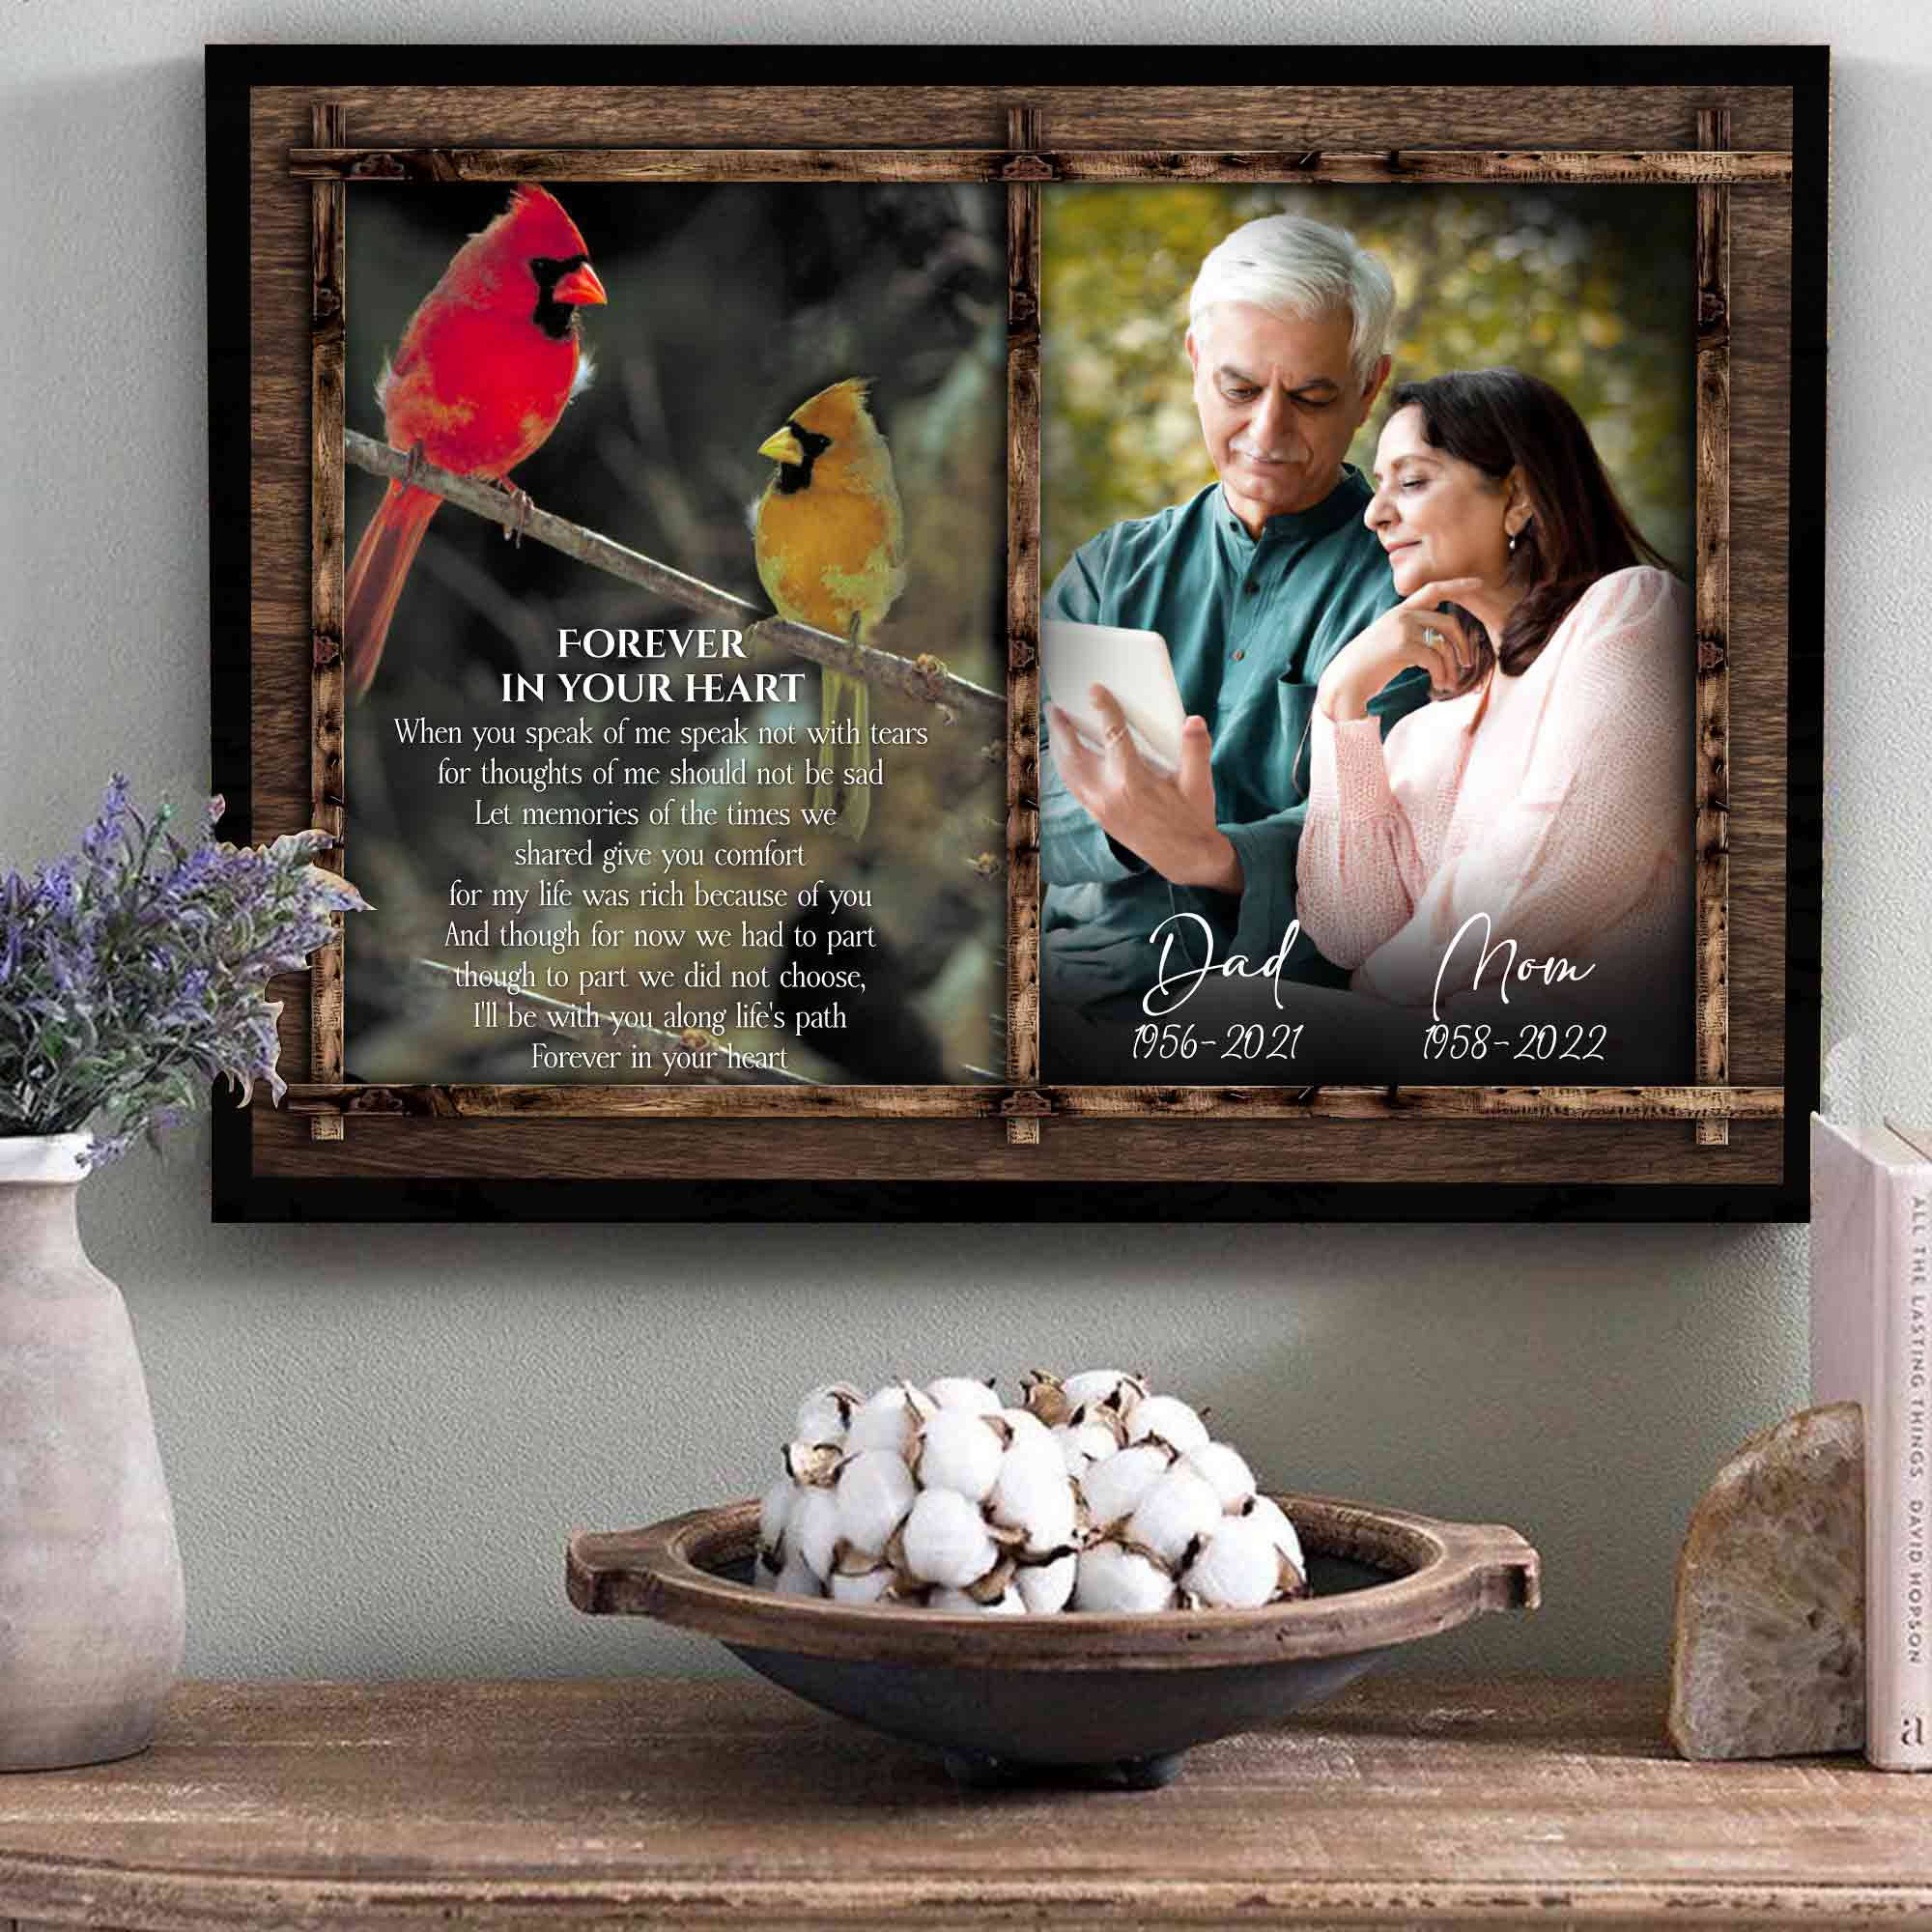 Memorial Gifts for Loss of Dad and Mom, Red Cardinal Memorial Canvas Photos For Loss Of Parent, Personalized Memorial Gifts With Photo